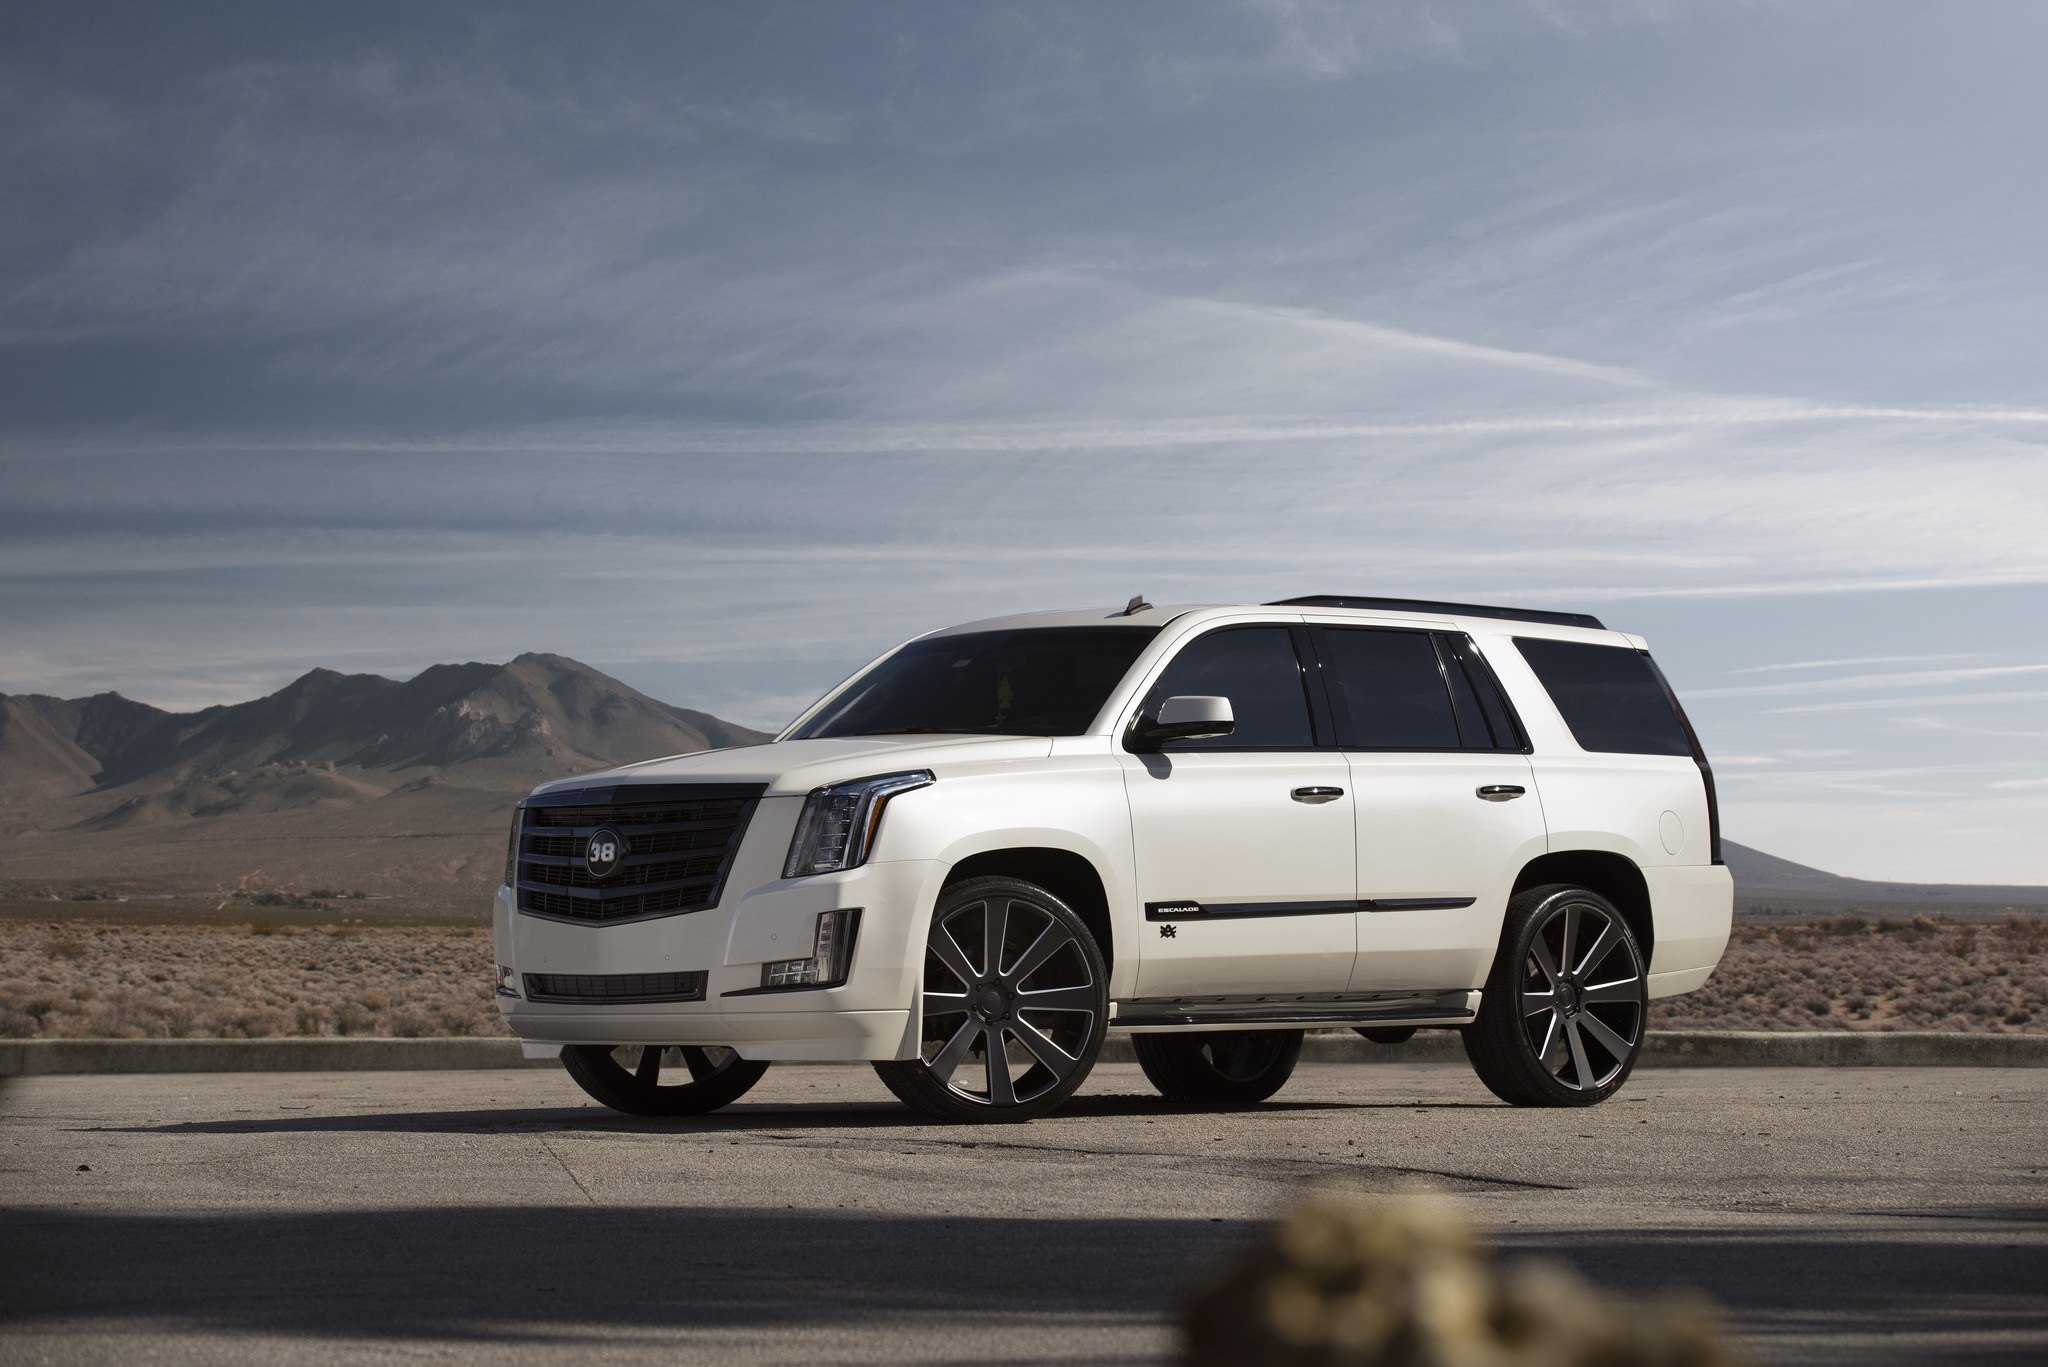 Aftermarket Running Boards on White Lifted Cadillac Escalade  - Photo by DUB